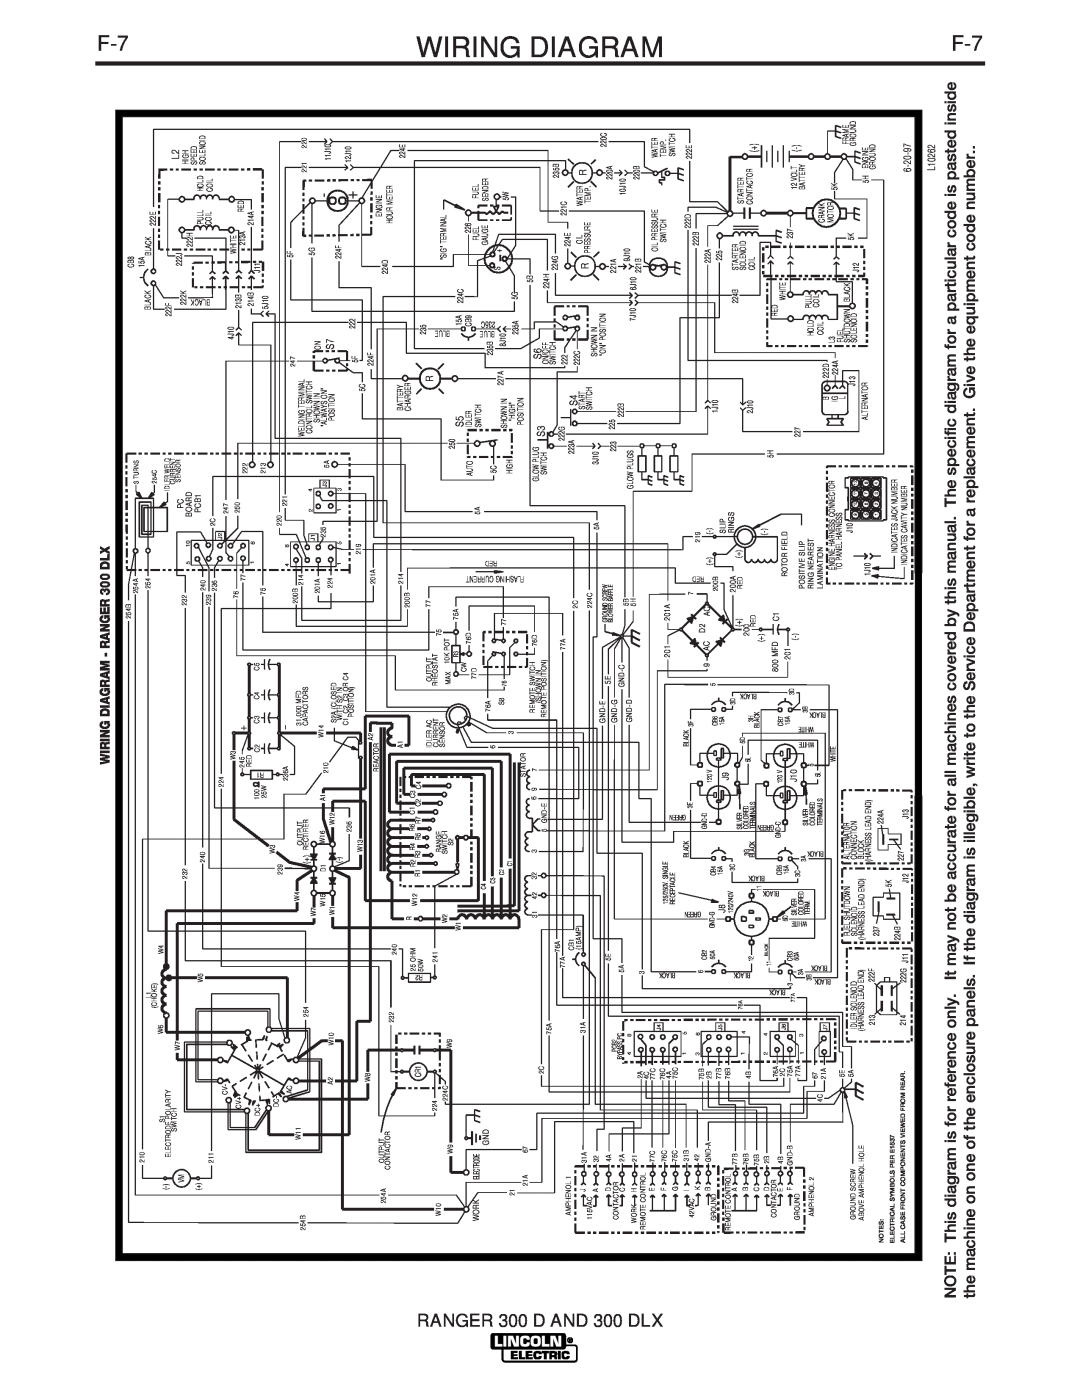 Lincoln Electric manual Wiring, Diagram, Ranger, D AND 300 DLX 